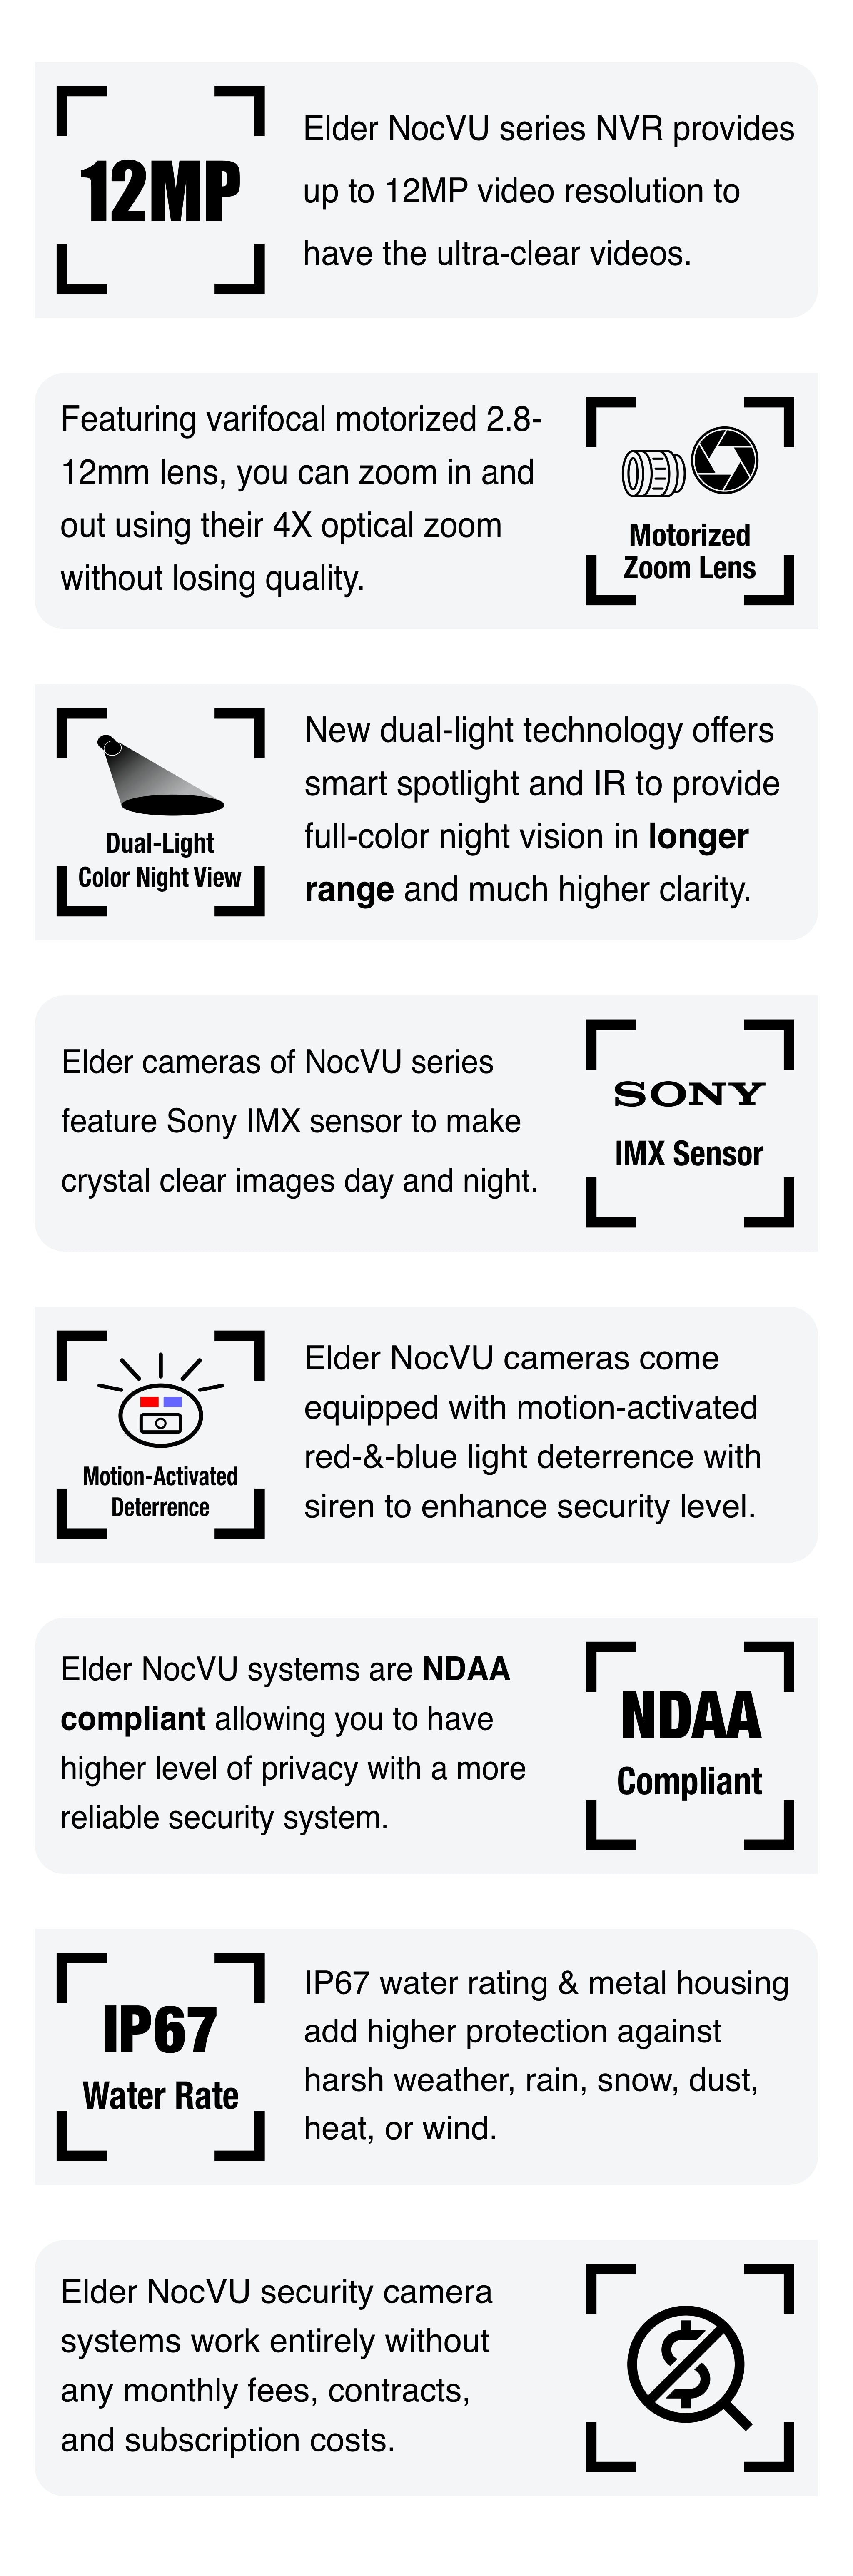 Security camera system from Nocturnal series is NDAA compliant and works without any monthly fees. Nocturnal surveillance systems from Elder feature long-range color night vision, and Sony sensor to provide the best and highest resolution images.